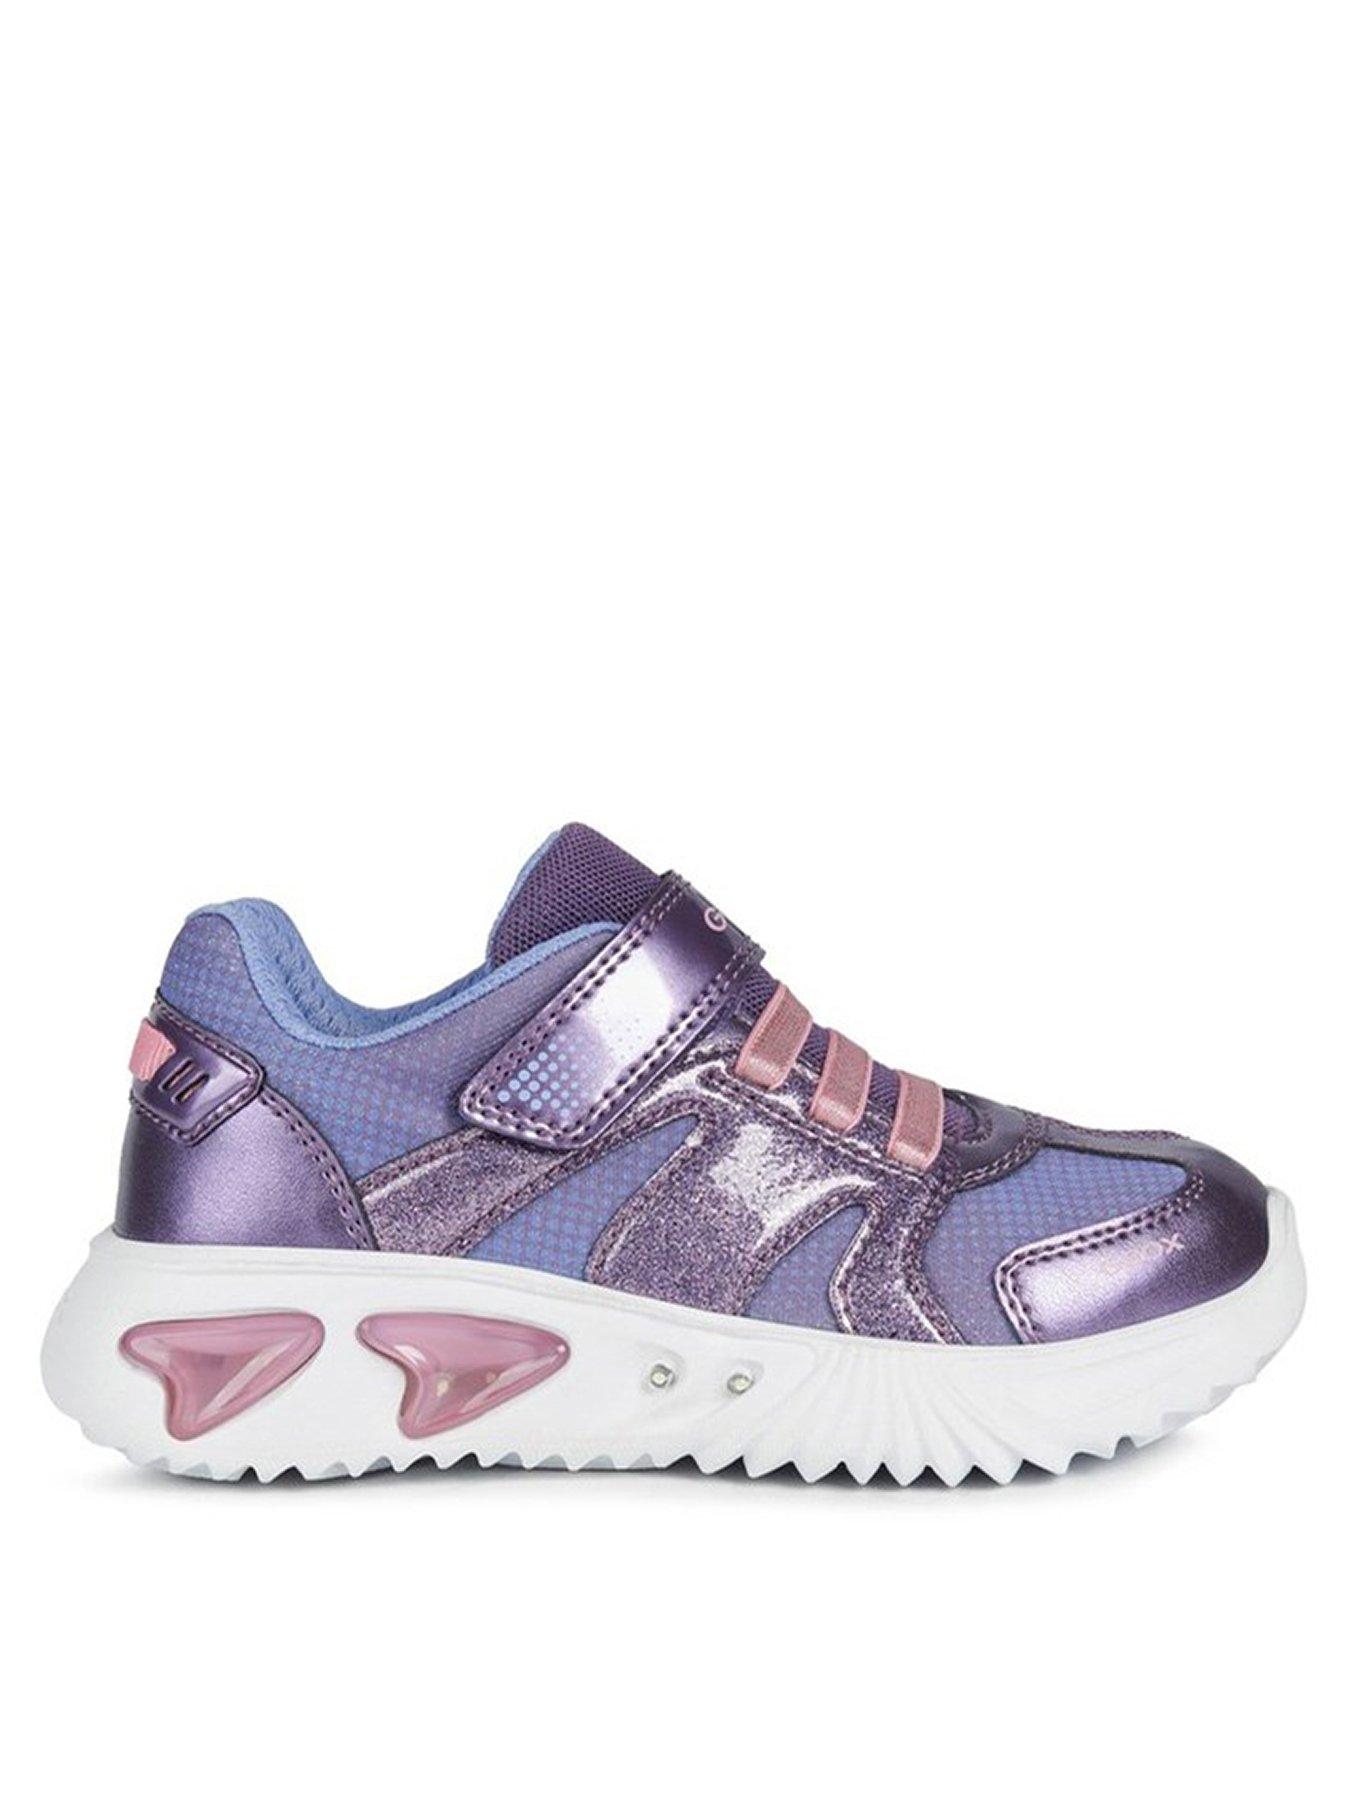  Girls Assister Strap Trainer - Purple/Pink